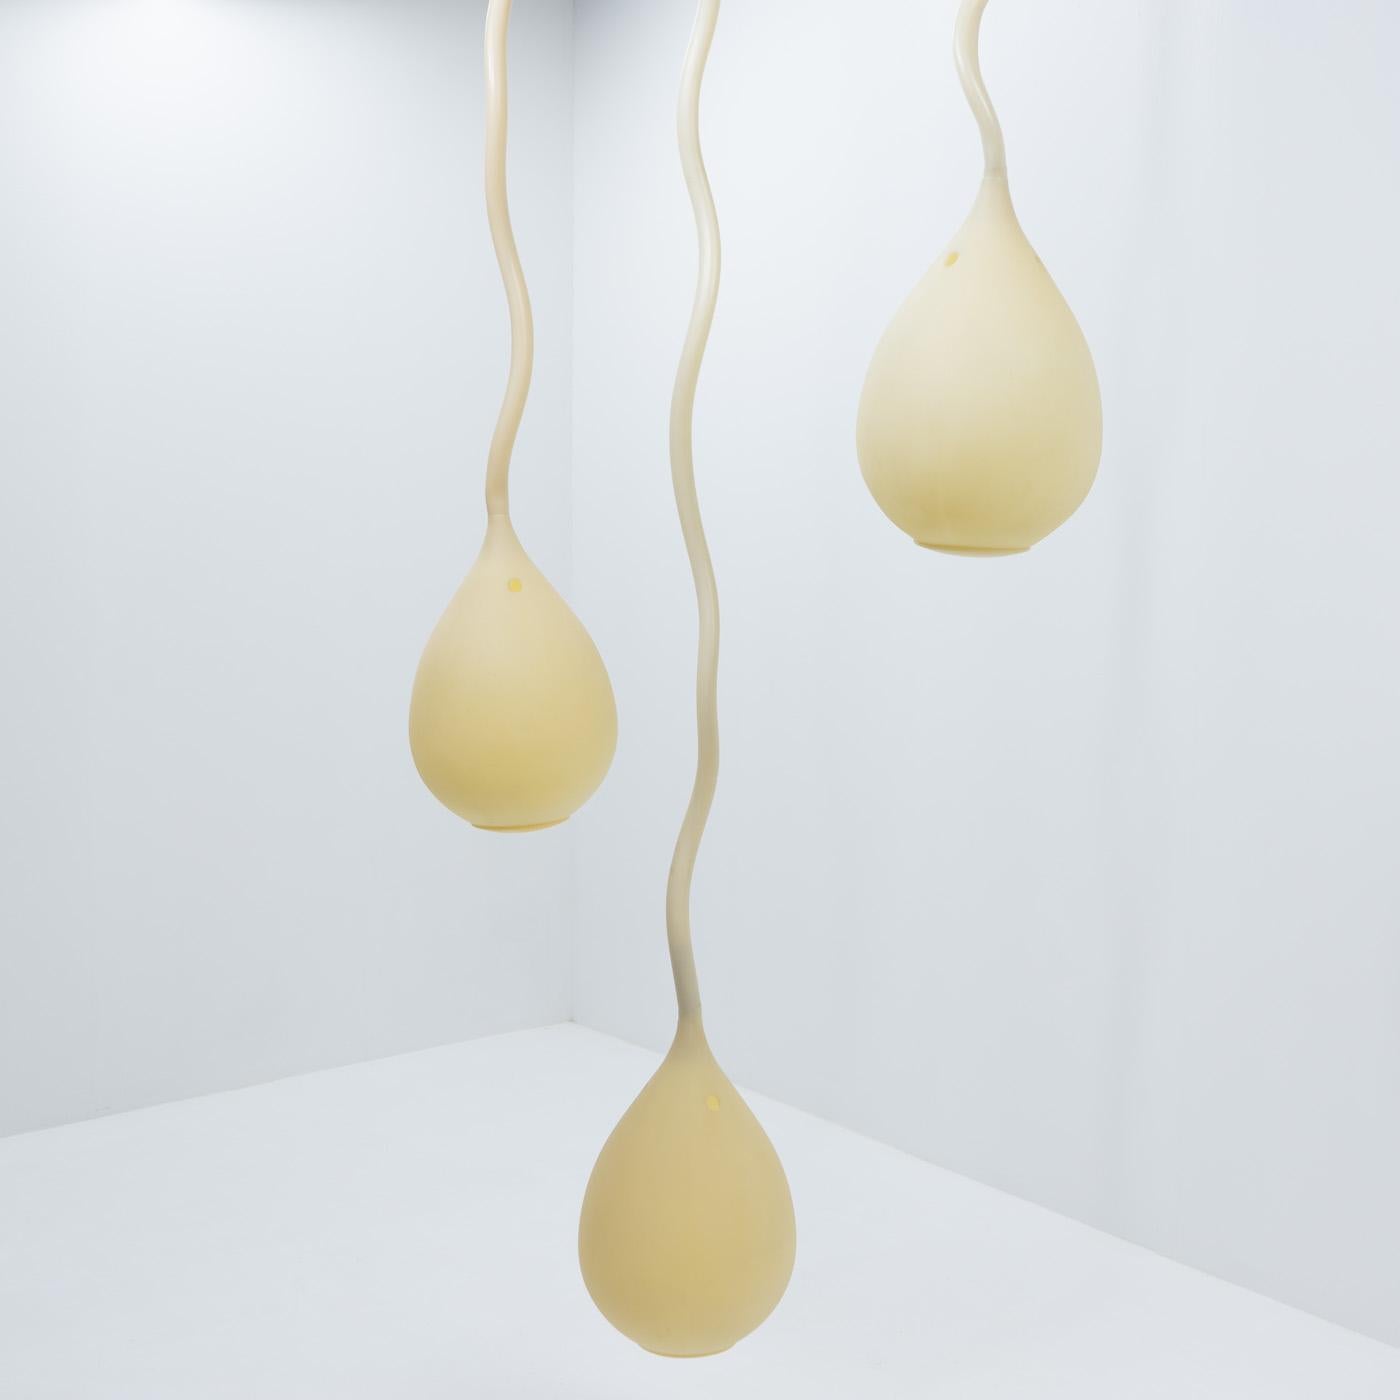 Rare Swiss Design Jingzi Ceiling Lamps, Herzog & De Meuron, for Belux, 2000s In Good Condition For Sale In Renens, CH